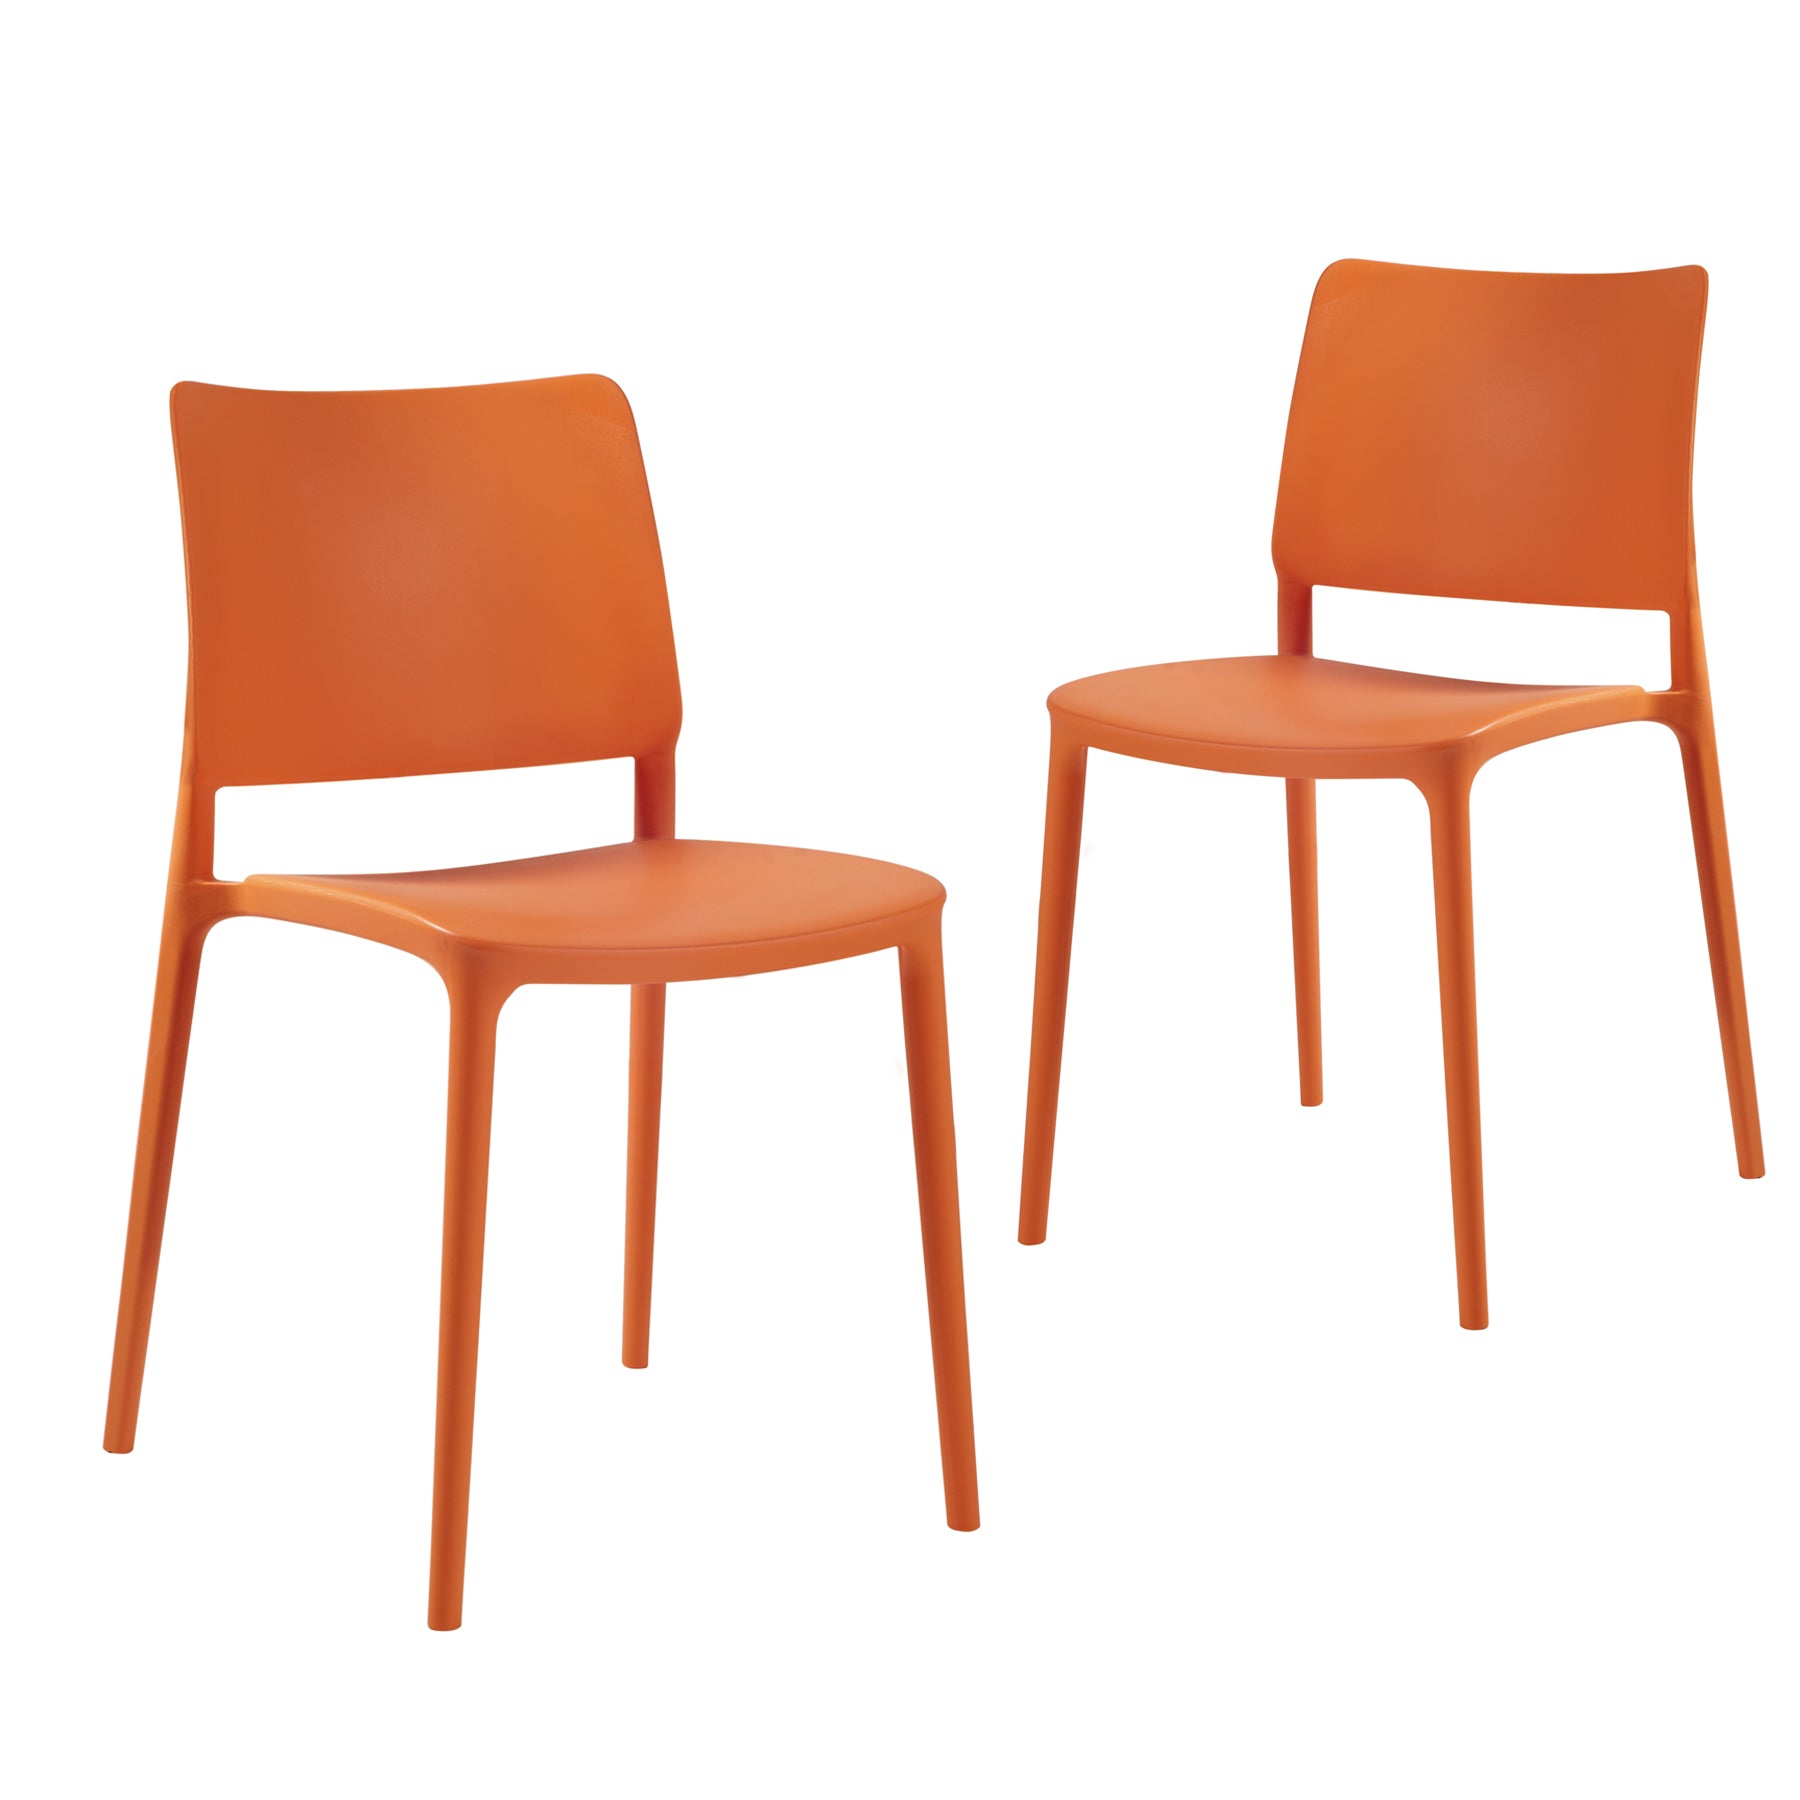 Cleo Patio Dining Chair in Orange - (Set of 2)